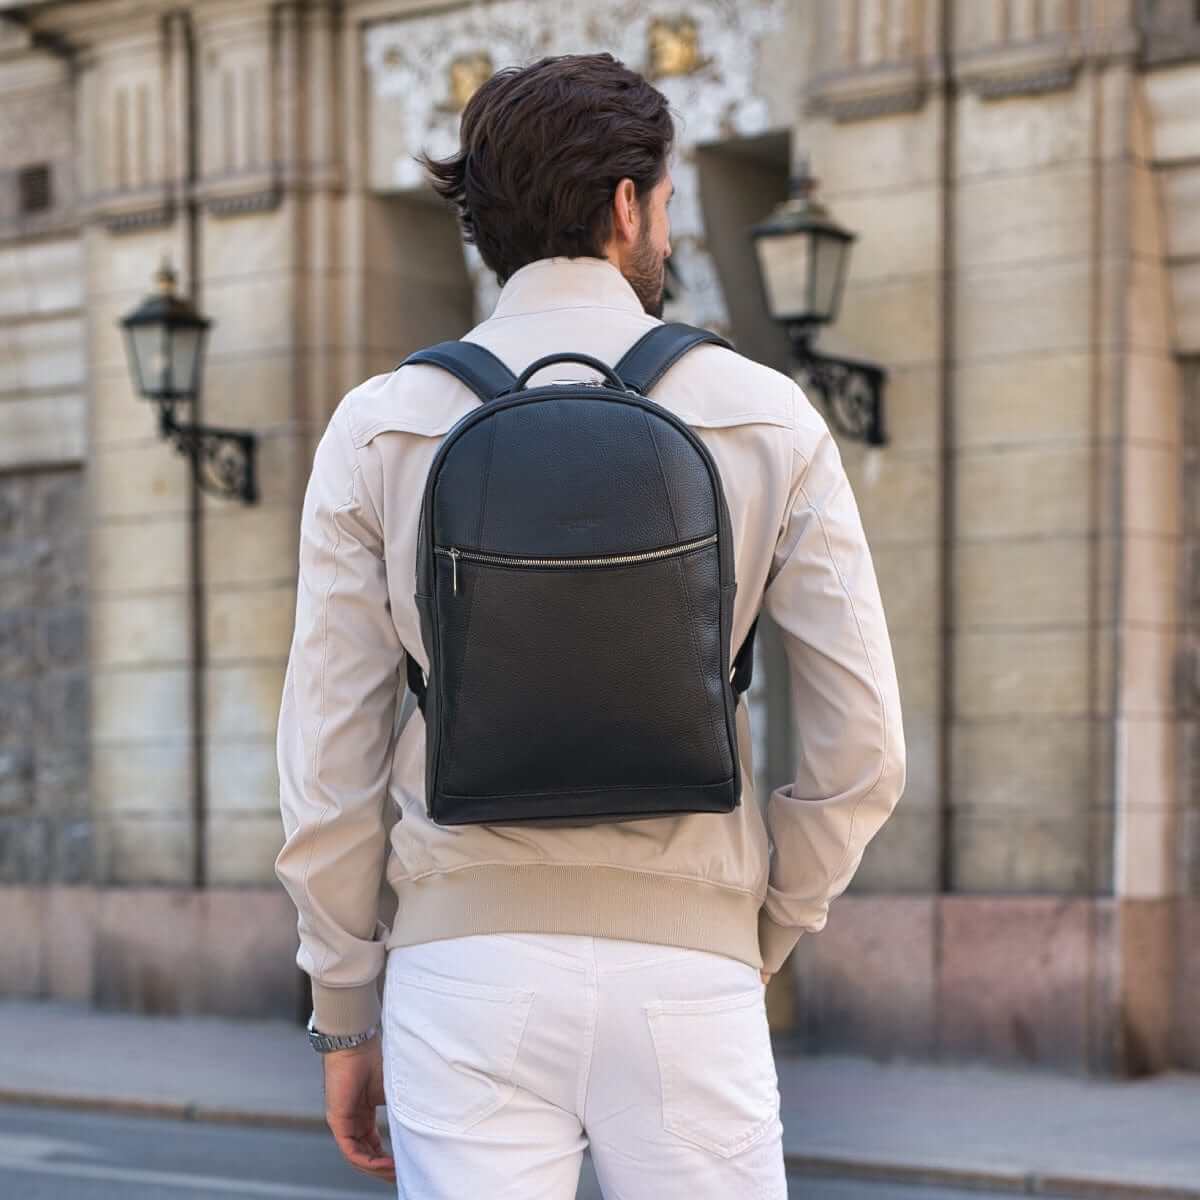 Luxury leather Arsante® Backpack in black, perfect for everyday adventures